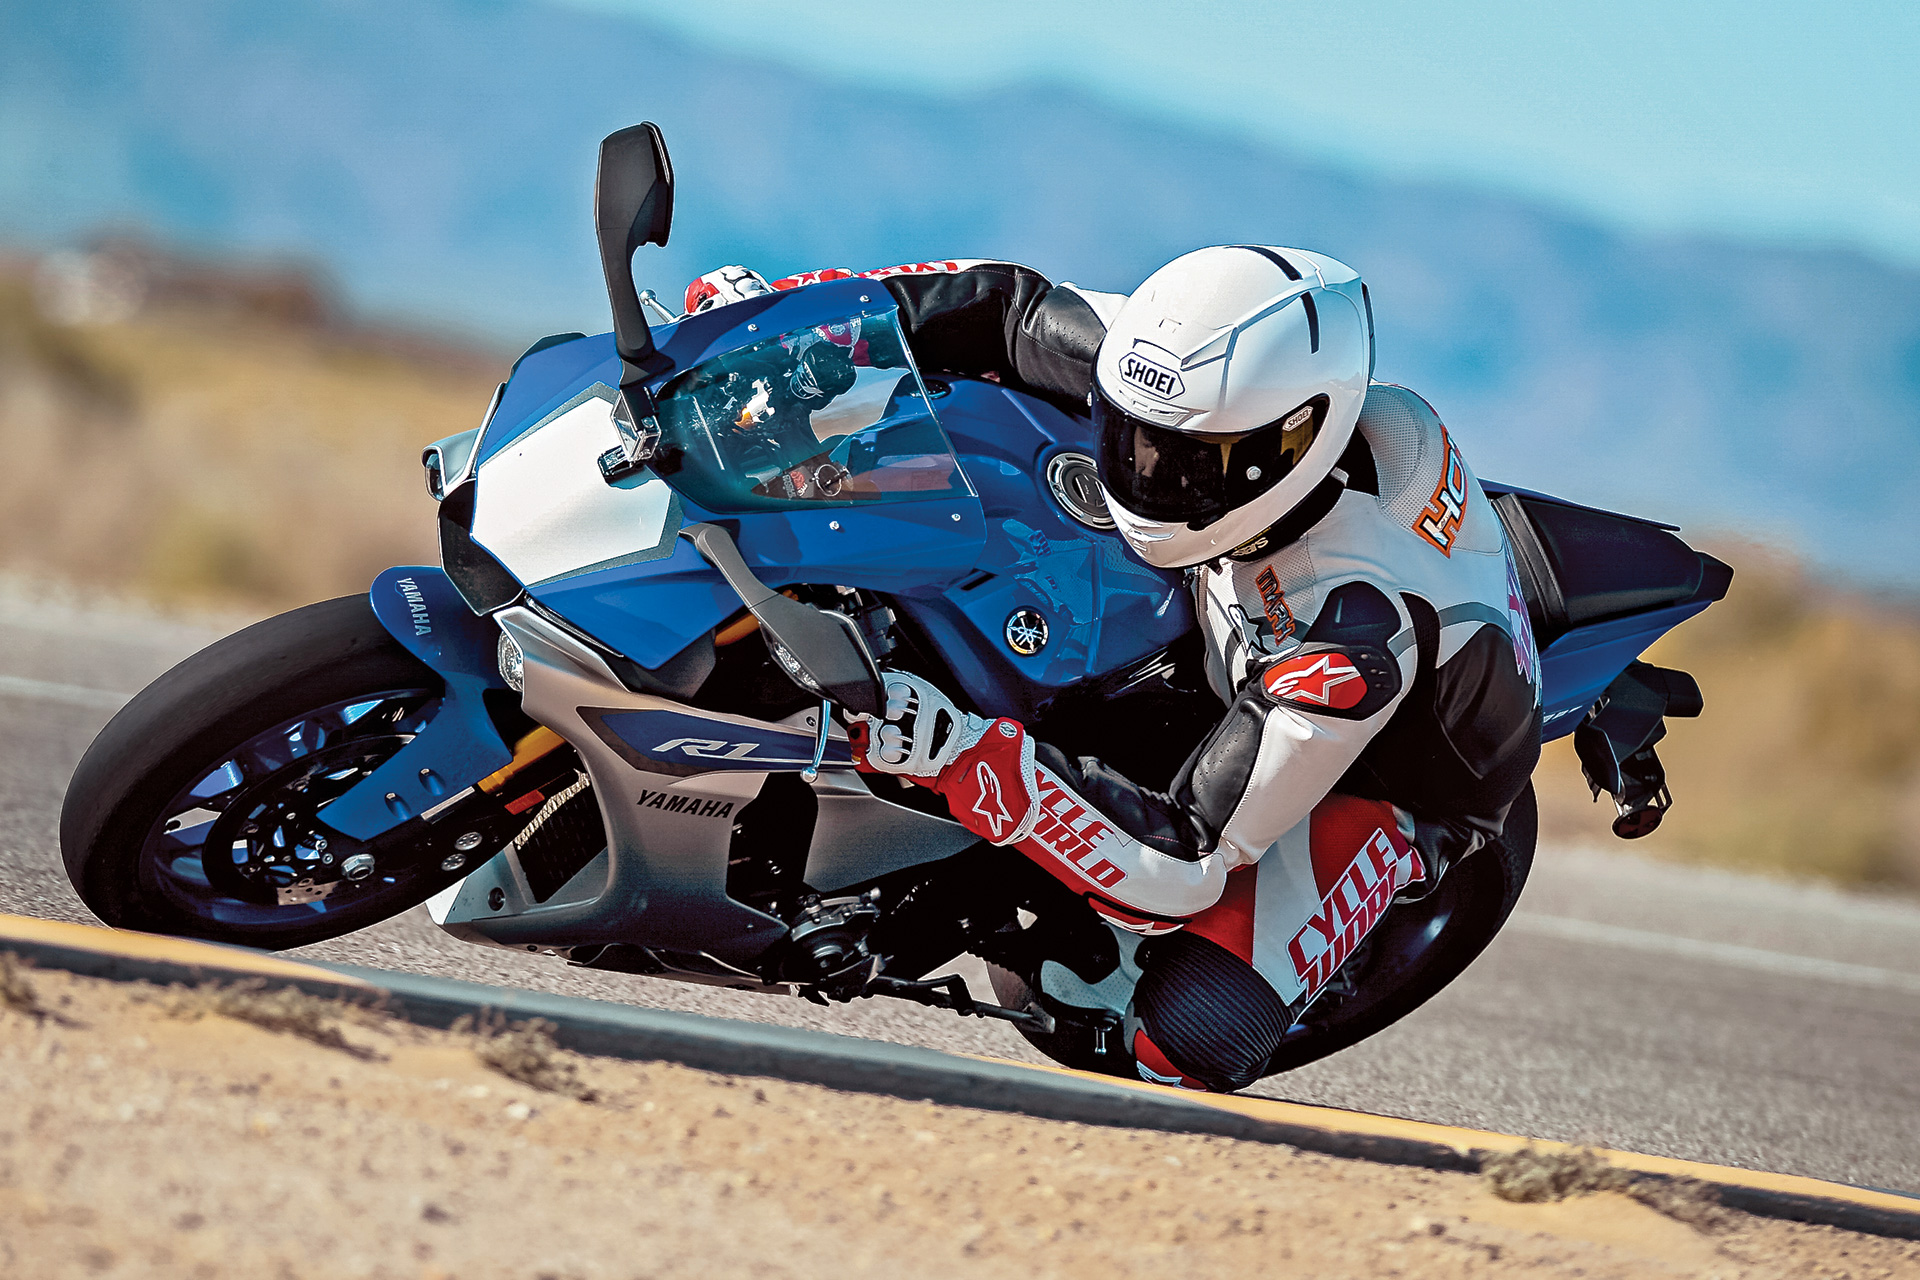 Shoei X-Fourteen Motorcycle Helmet EVALUATION, Gear Review | Cycle 